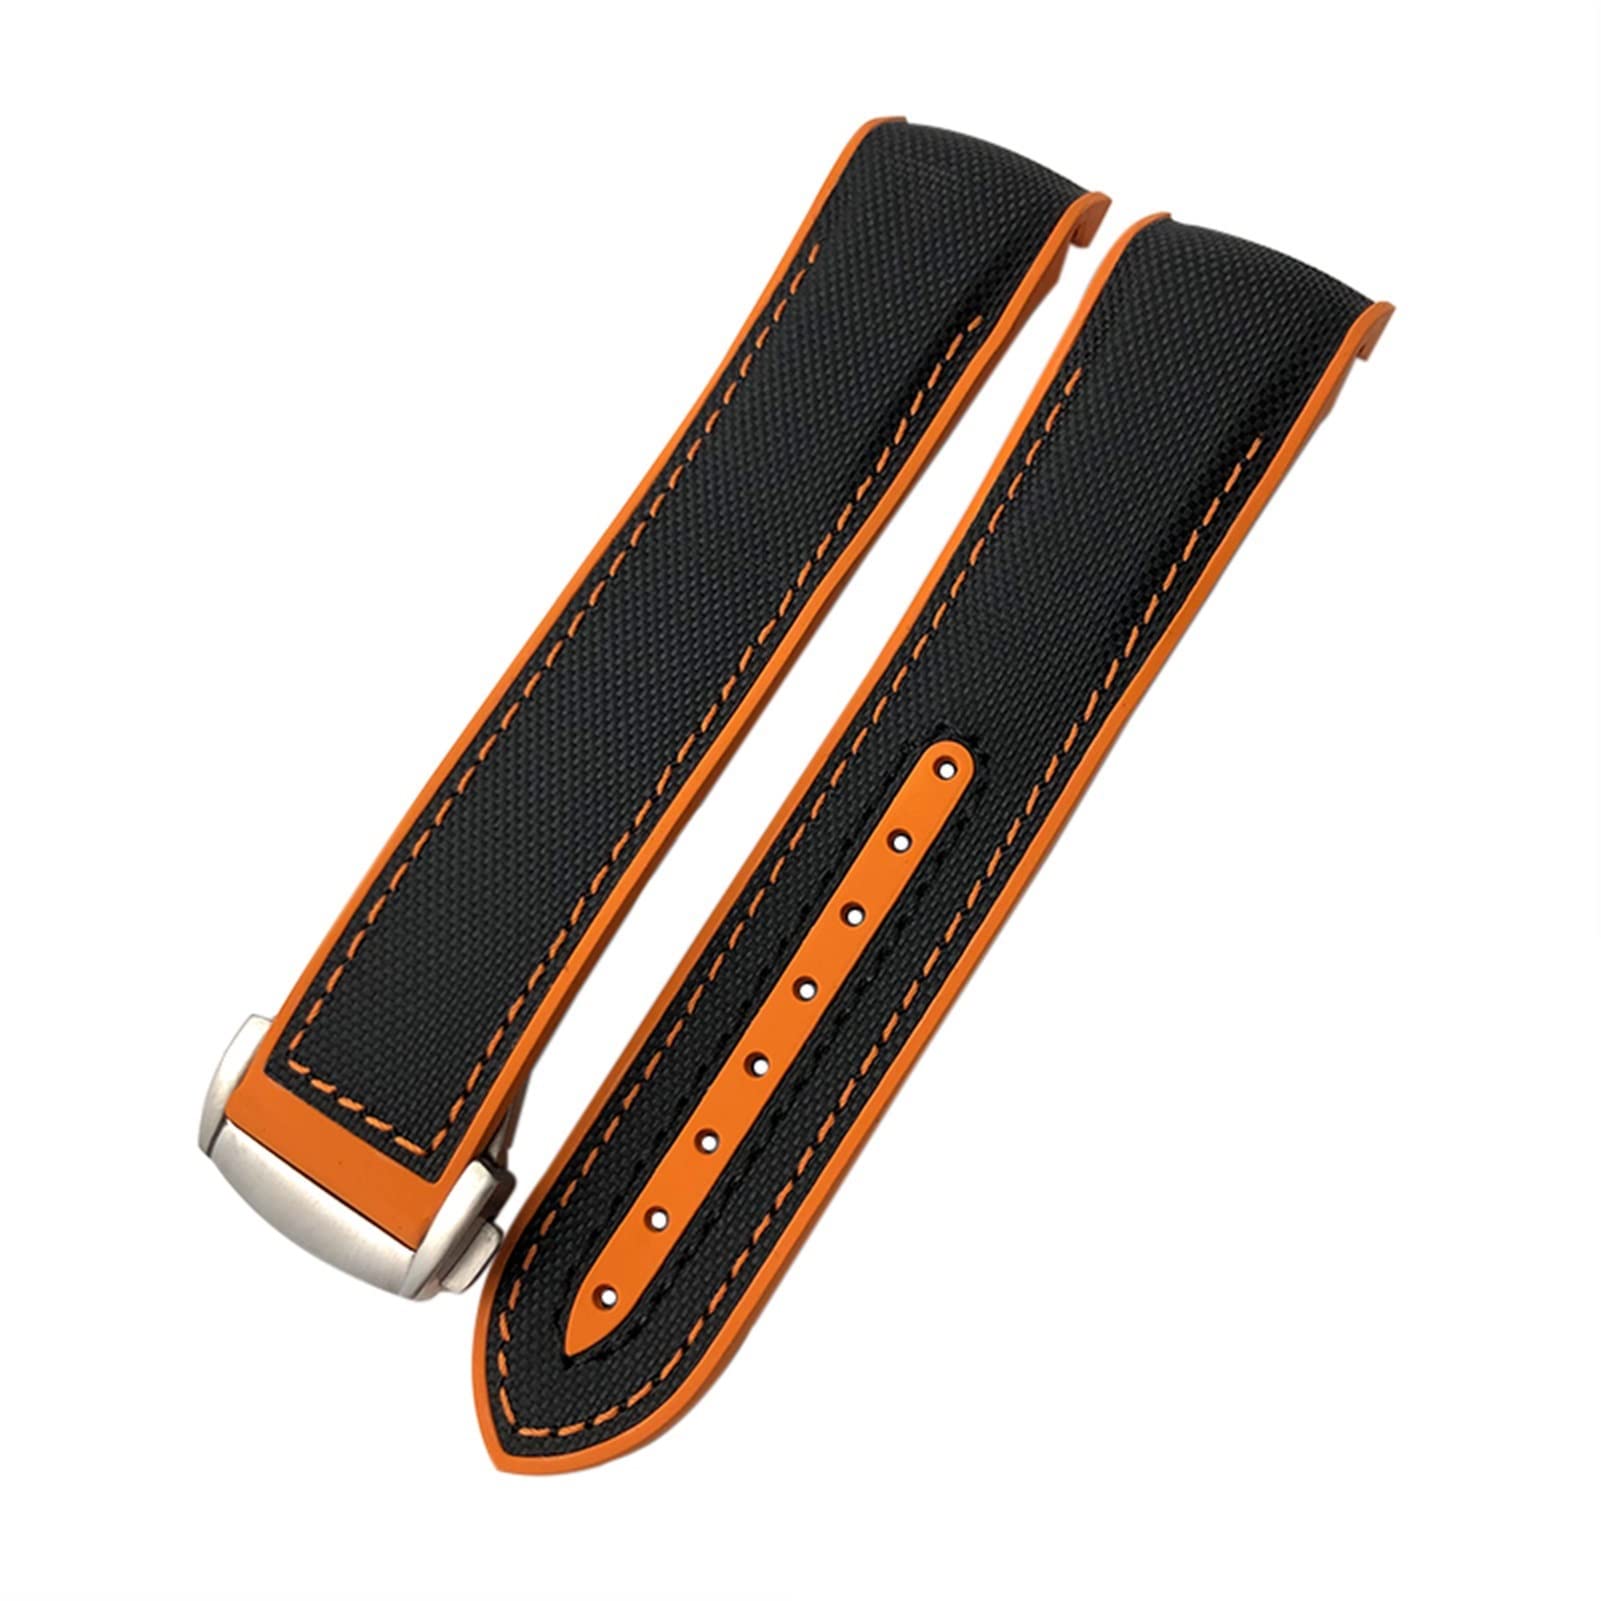 CRFYJ 20mm 21mm 22mm Nylon Rubber Watch Band Fit for Omega GMT Seamaster Planet Ocean 600 8900 Orange Canvas Silicone Strap (Color : Black Orange, Size : 21mm)